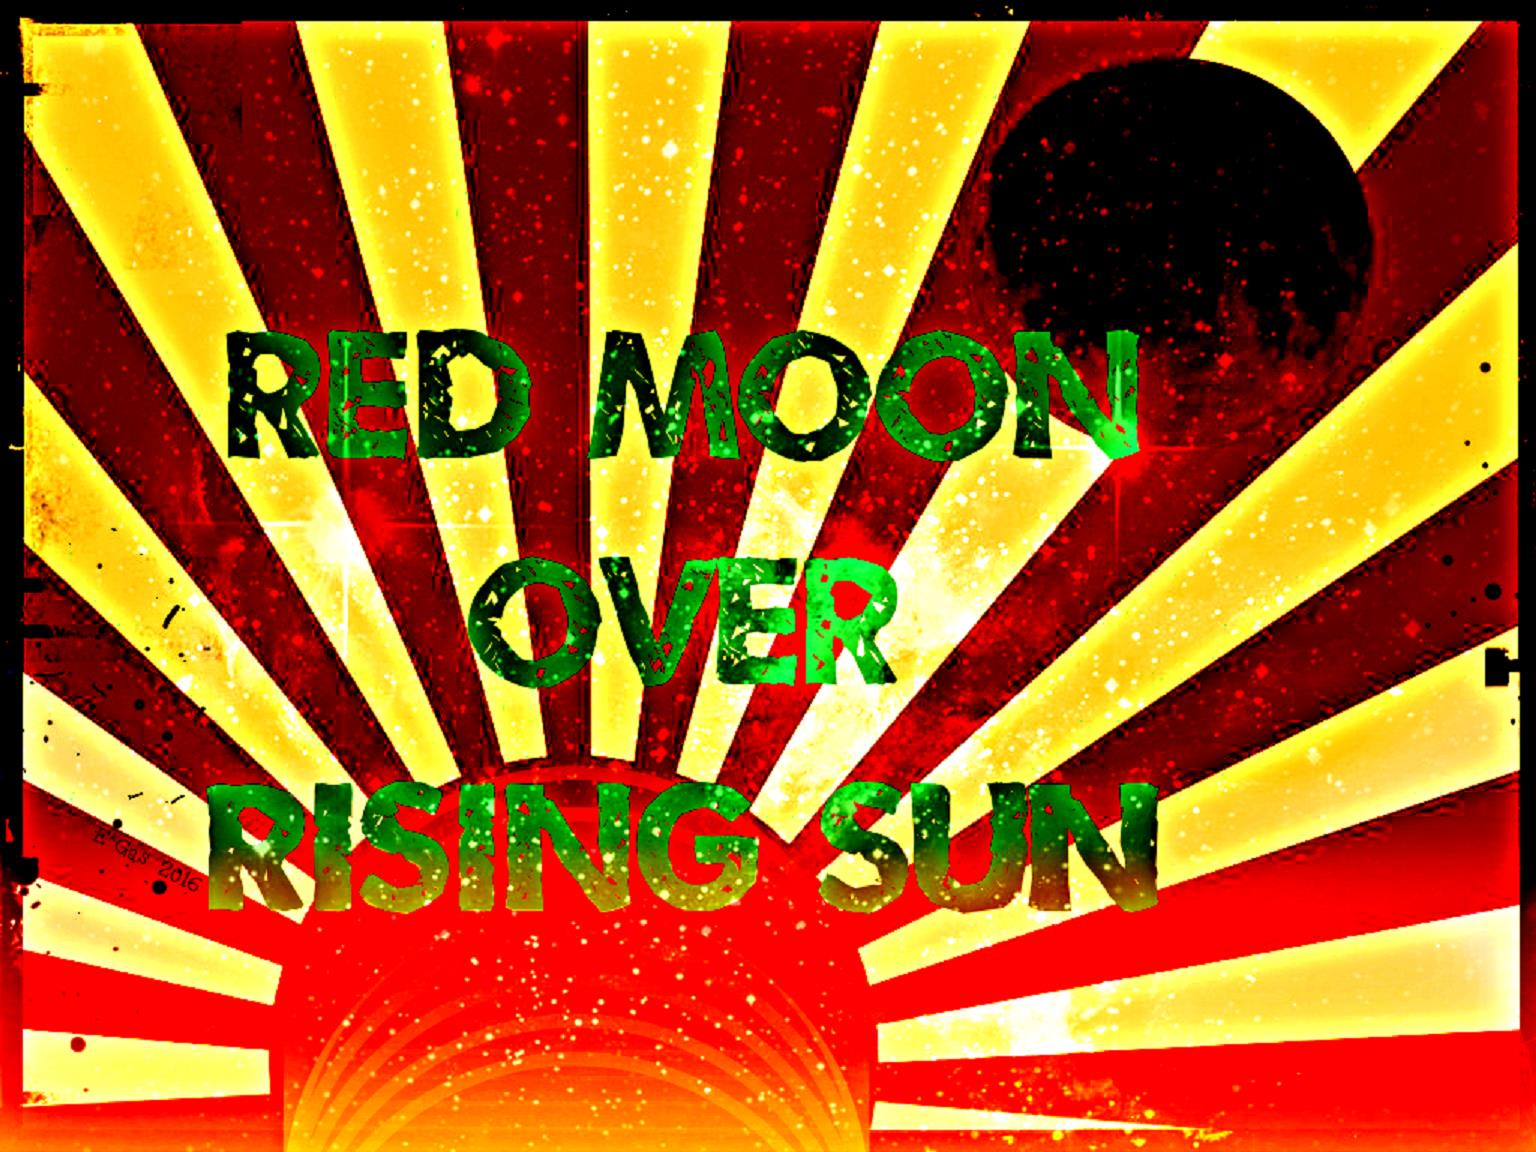 Red Moon over Rising Sun